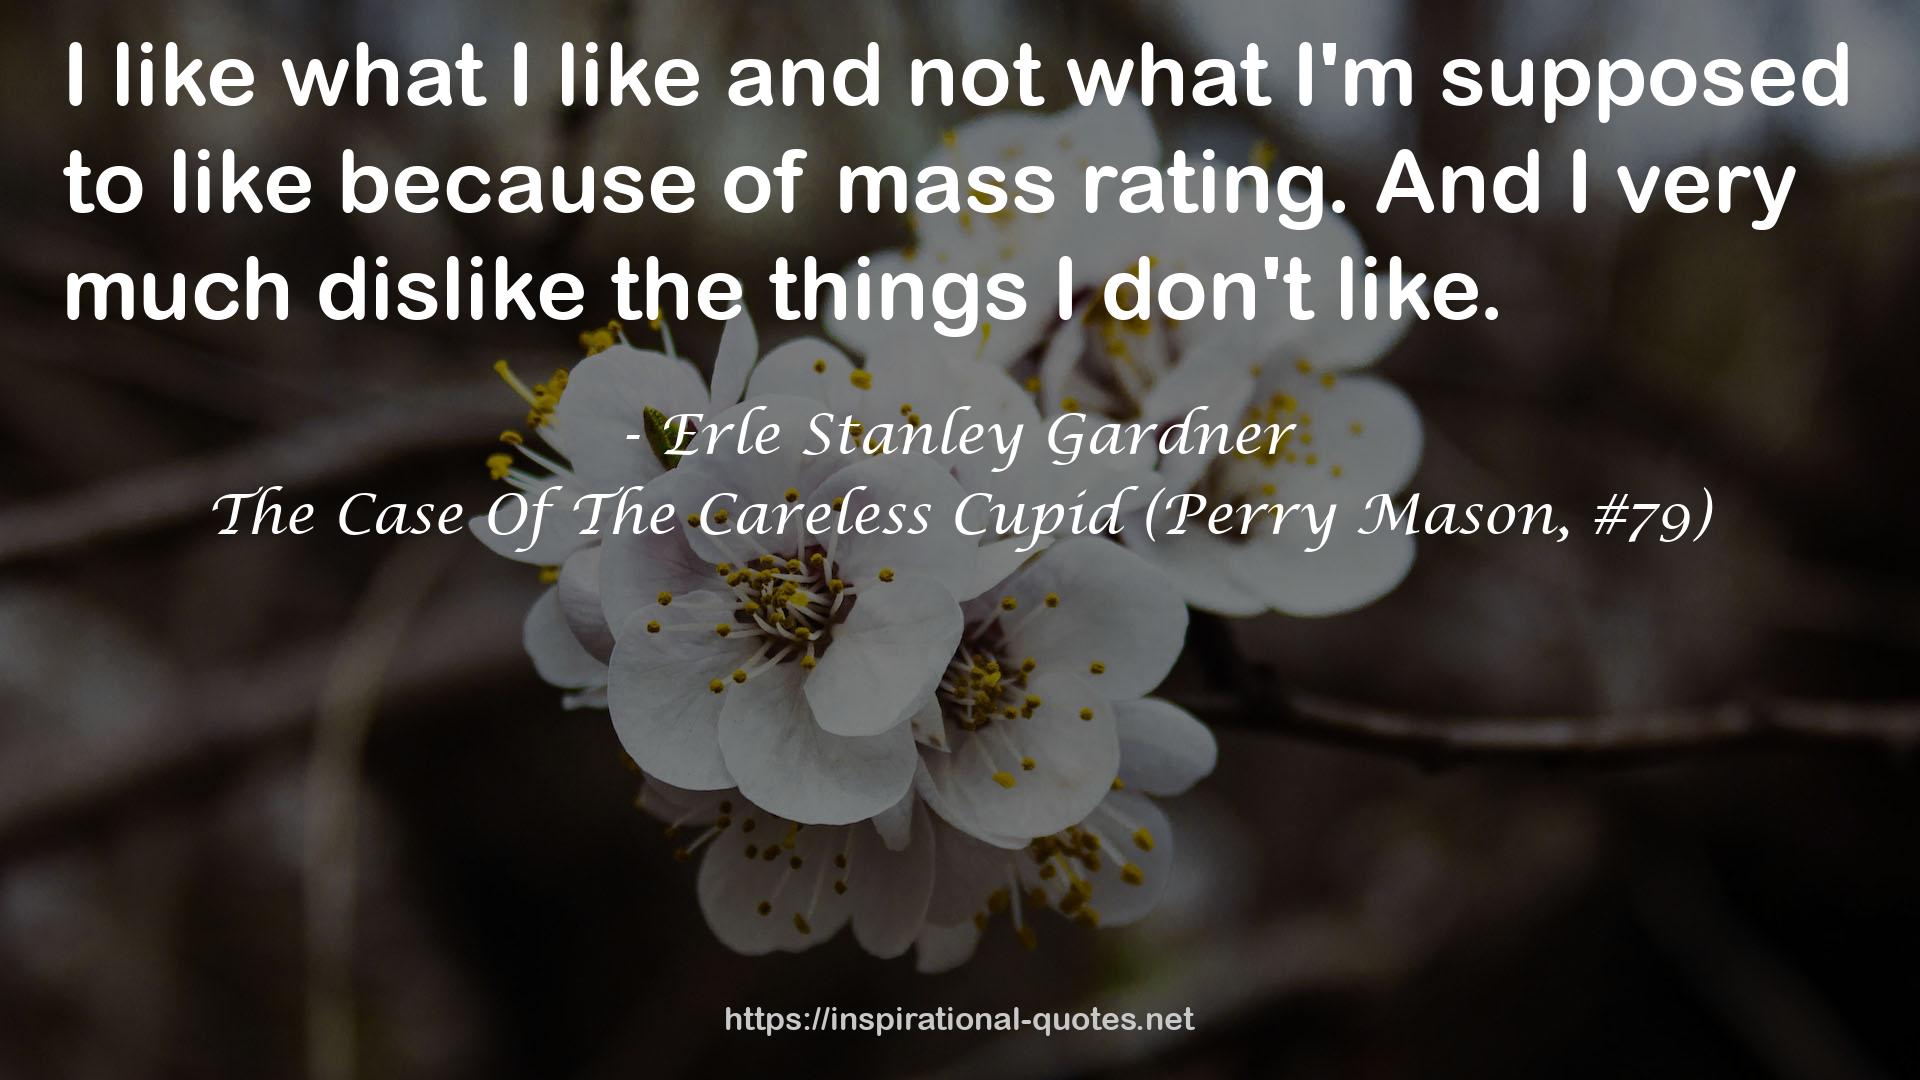 The Case Of The Careless Cupid (Perry Mason, #79) QUOTES